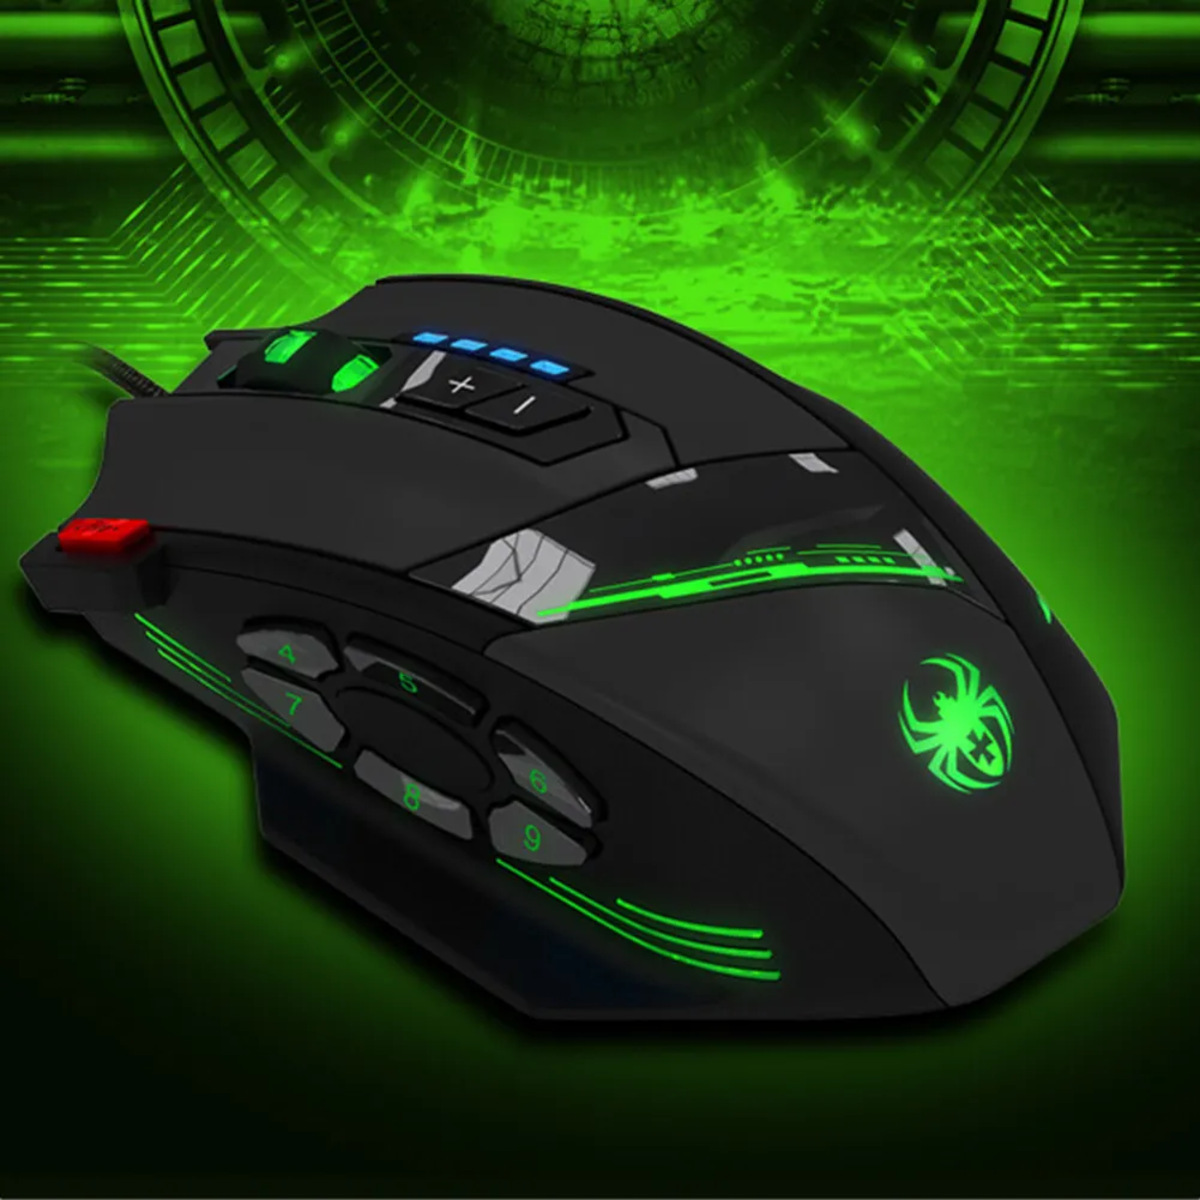 How To Use C-12 Zelotes Gaming Mouse